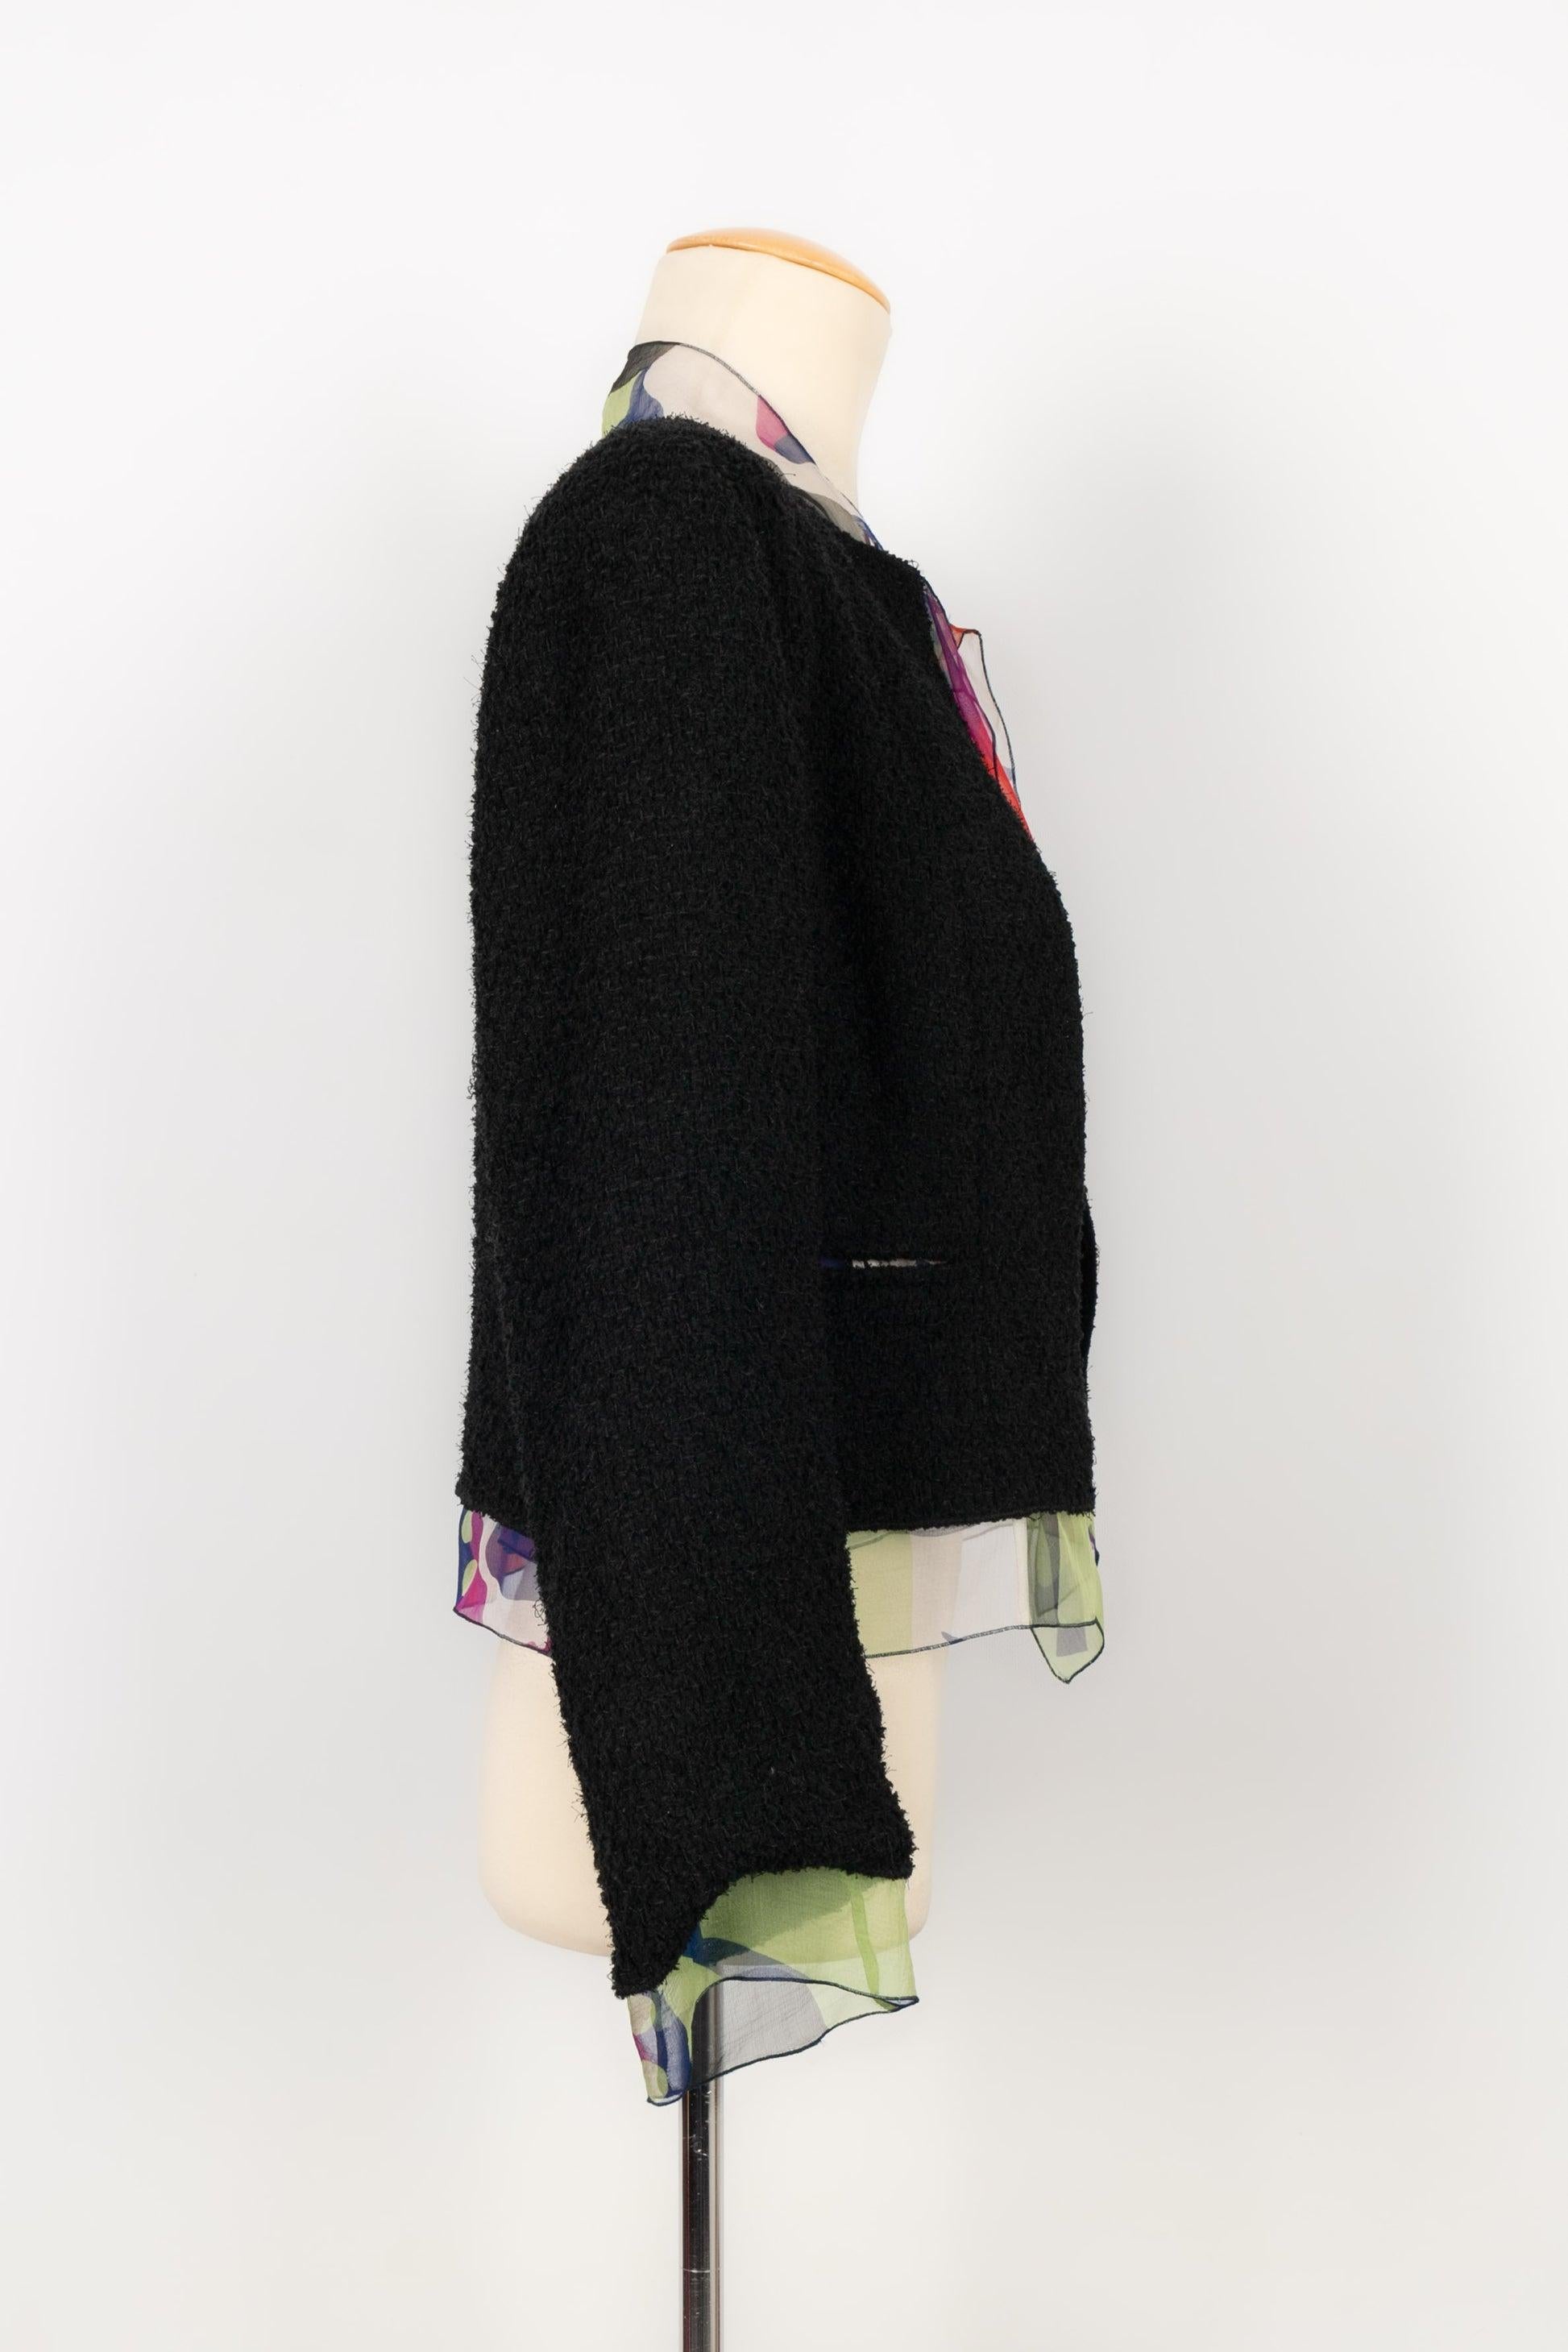 Chanel - (Made in France) Set composed of a black wool jacket embroidered with silk and a silk top with colored patterns. Indicated size 38FR. 2000 Collection.

Additional information:
Condition: Very good condition
Dimensions: Jacket: Shoulder